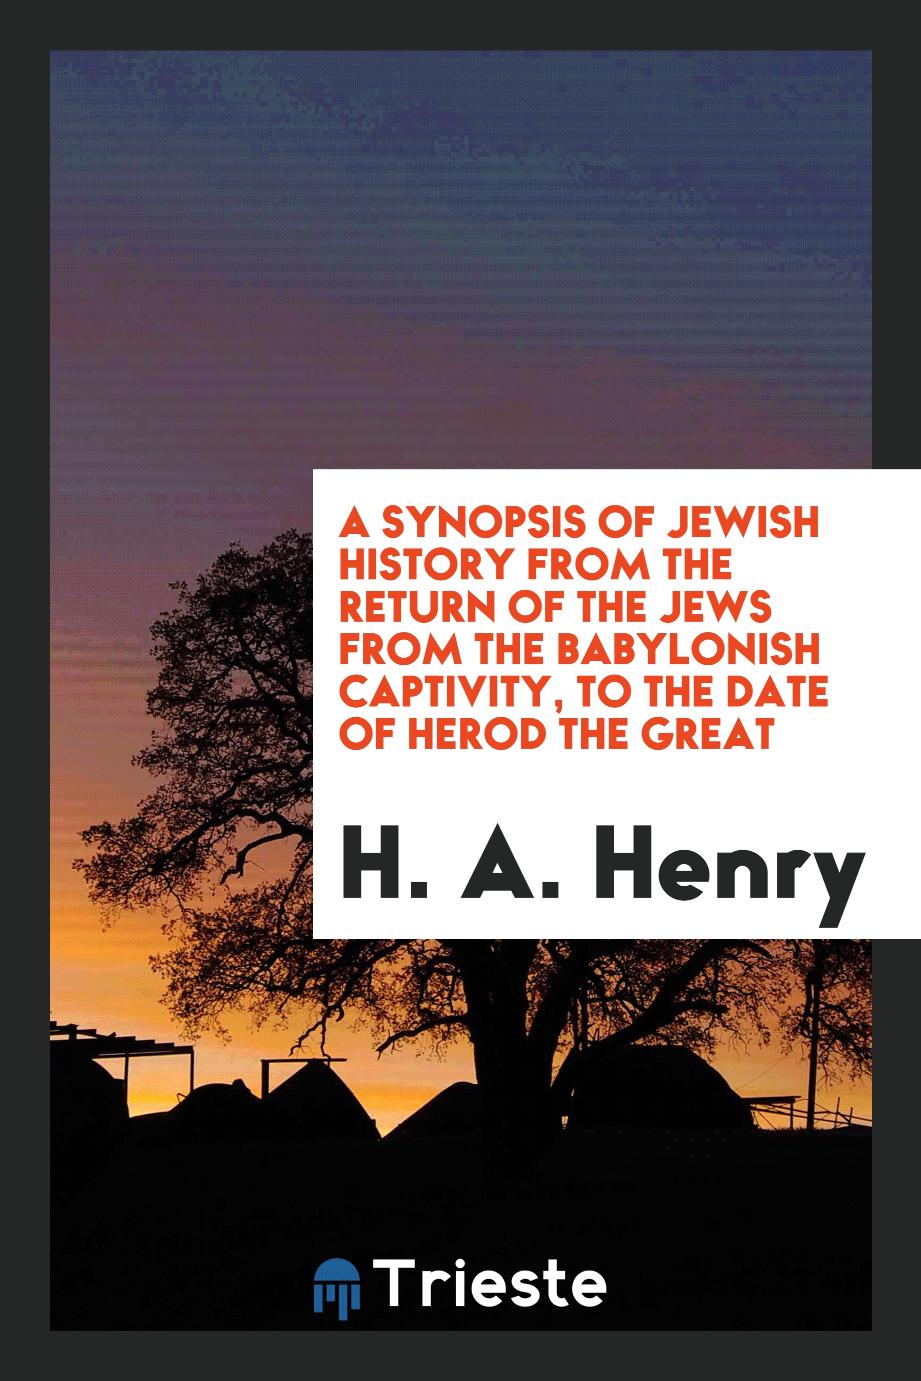 A Synopsis of Jewish History from the Return of the Jews from the Babylonish Captivity, to the Date of Herod the Great